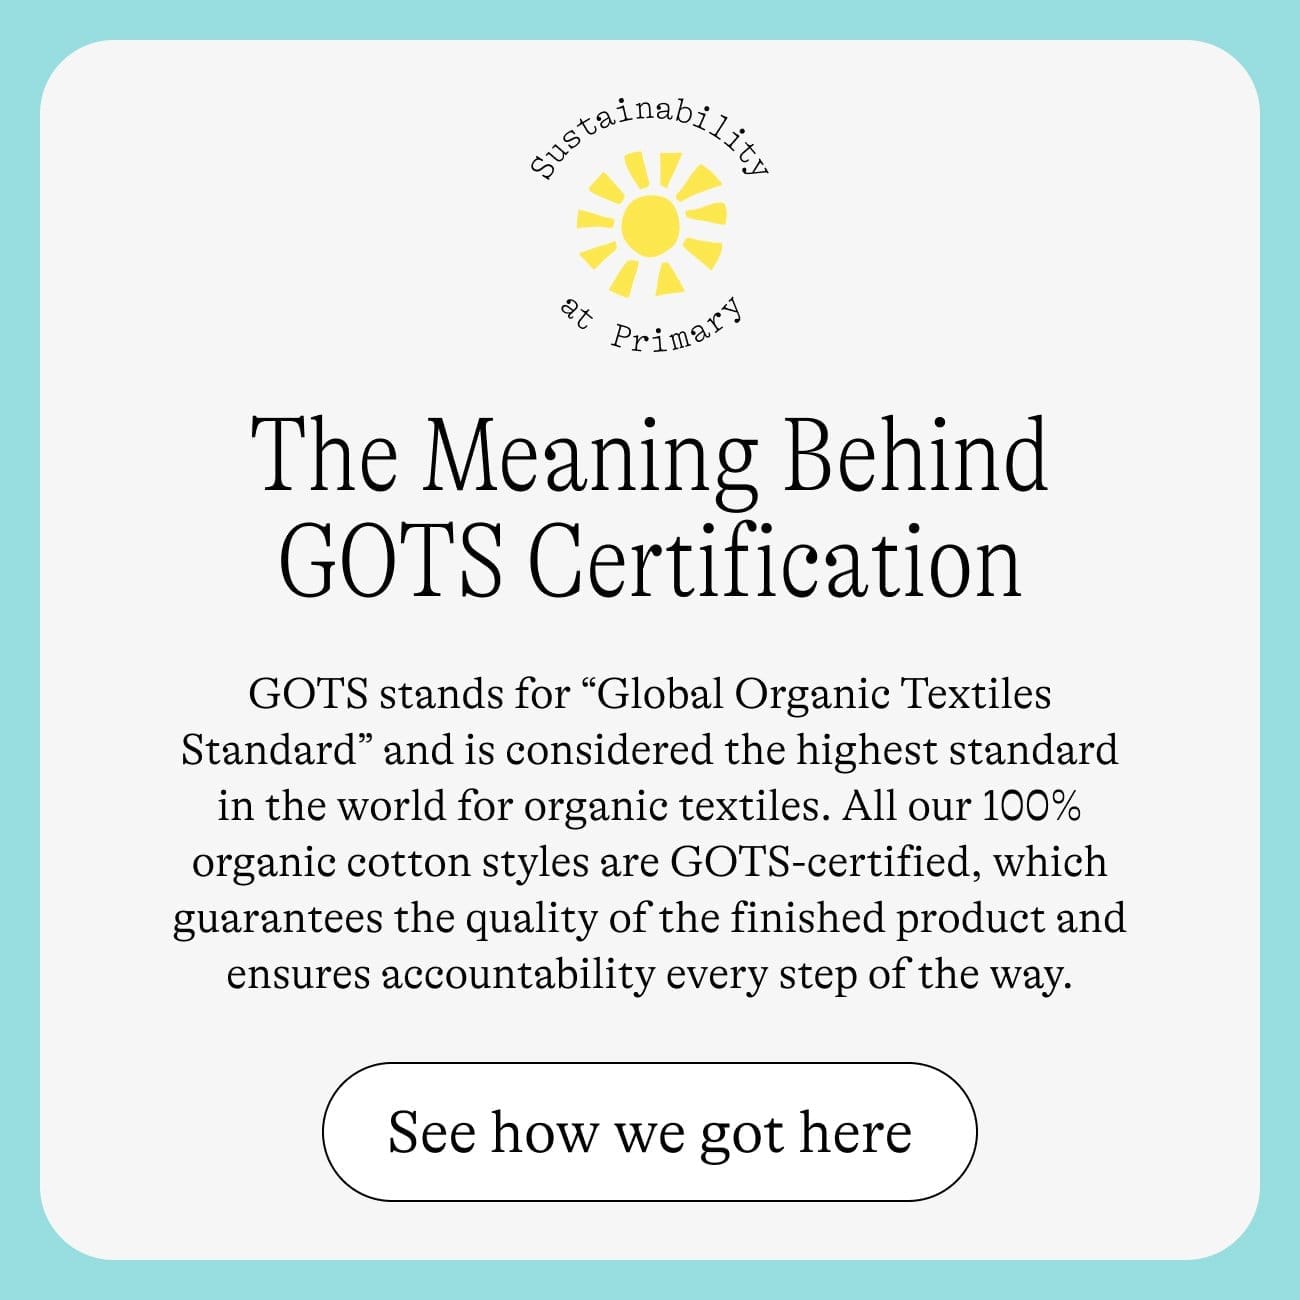 The Meaning Behind GOTS Certification. GOTS stands for “Global Organic Textiles Standard” and is considered the highest standard in the world for organic textiles. All our 100% organic cotton styles are GOTS-certified, which guarantees the quality of the finished product and ensures accountability every step of the way. See how we got here.